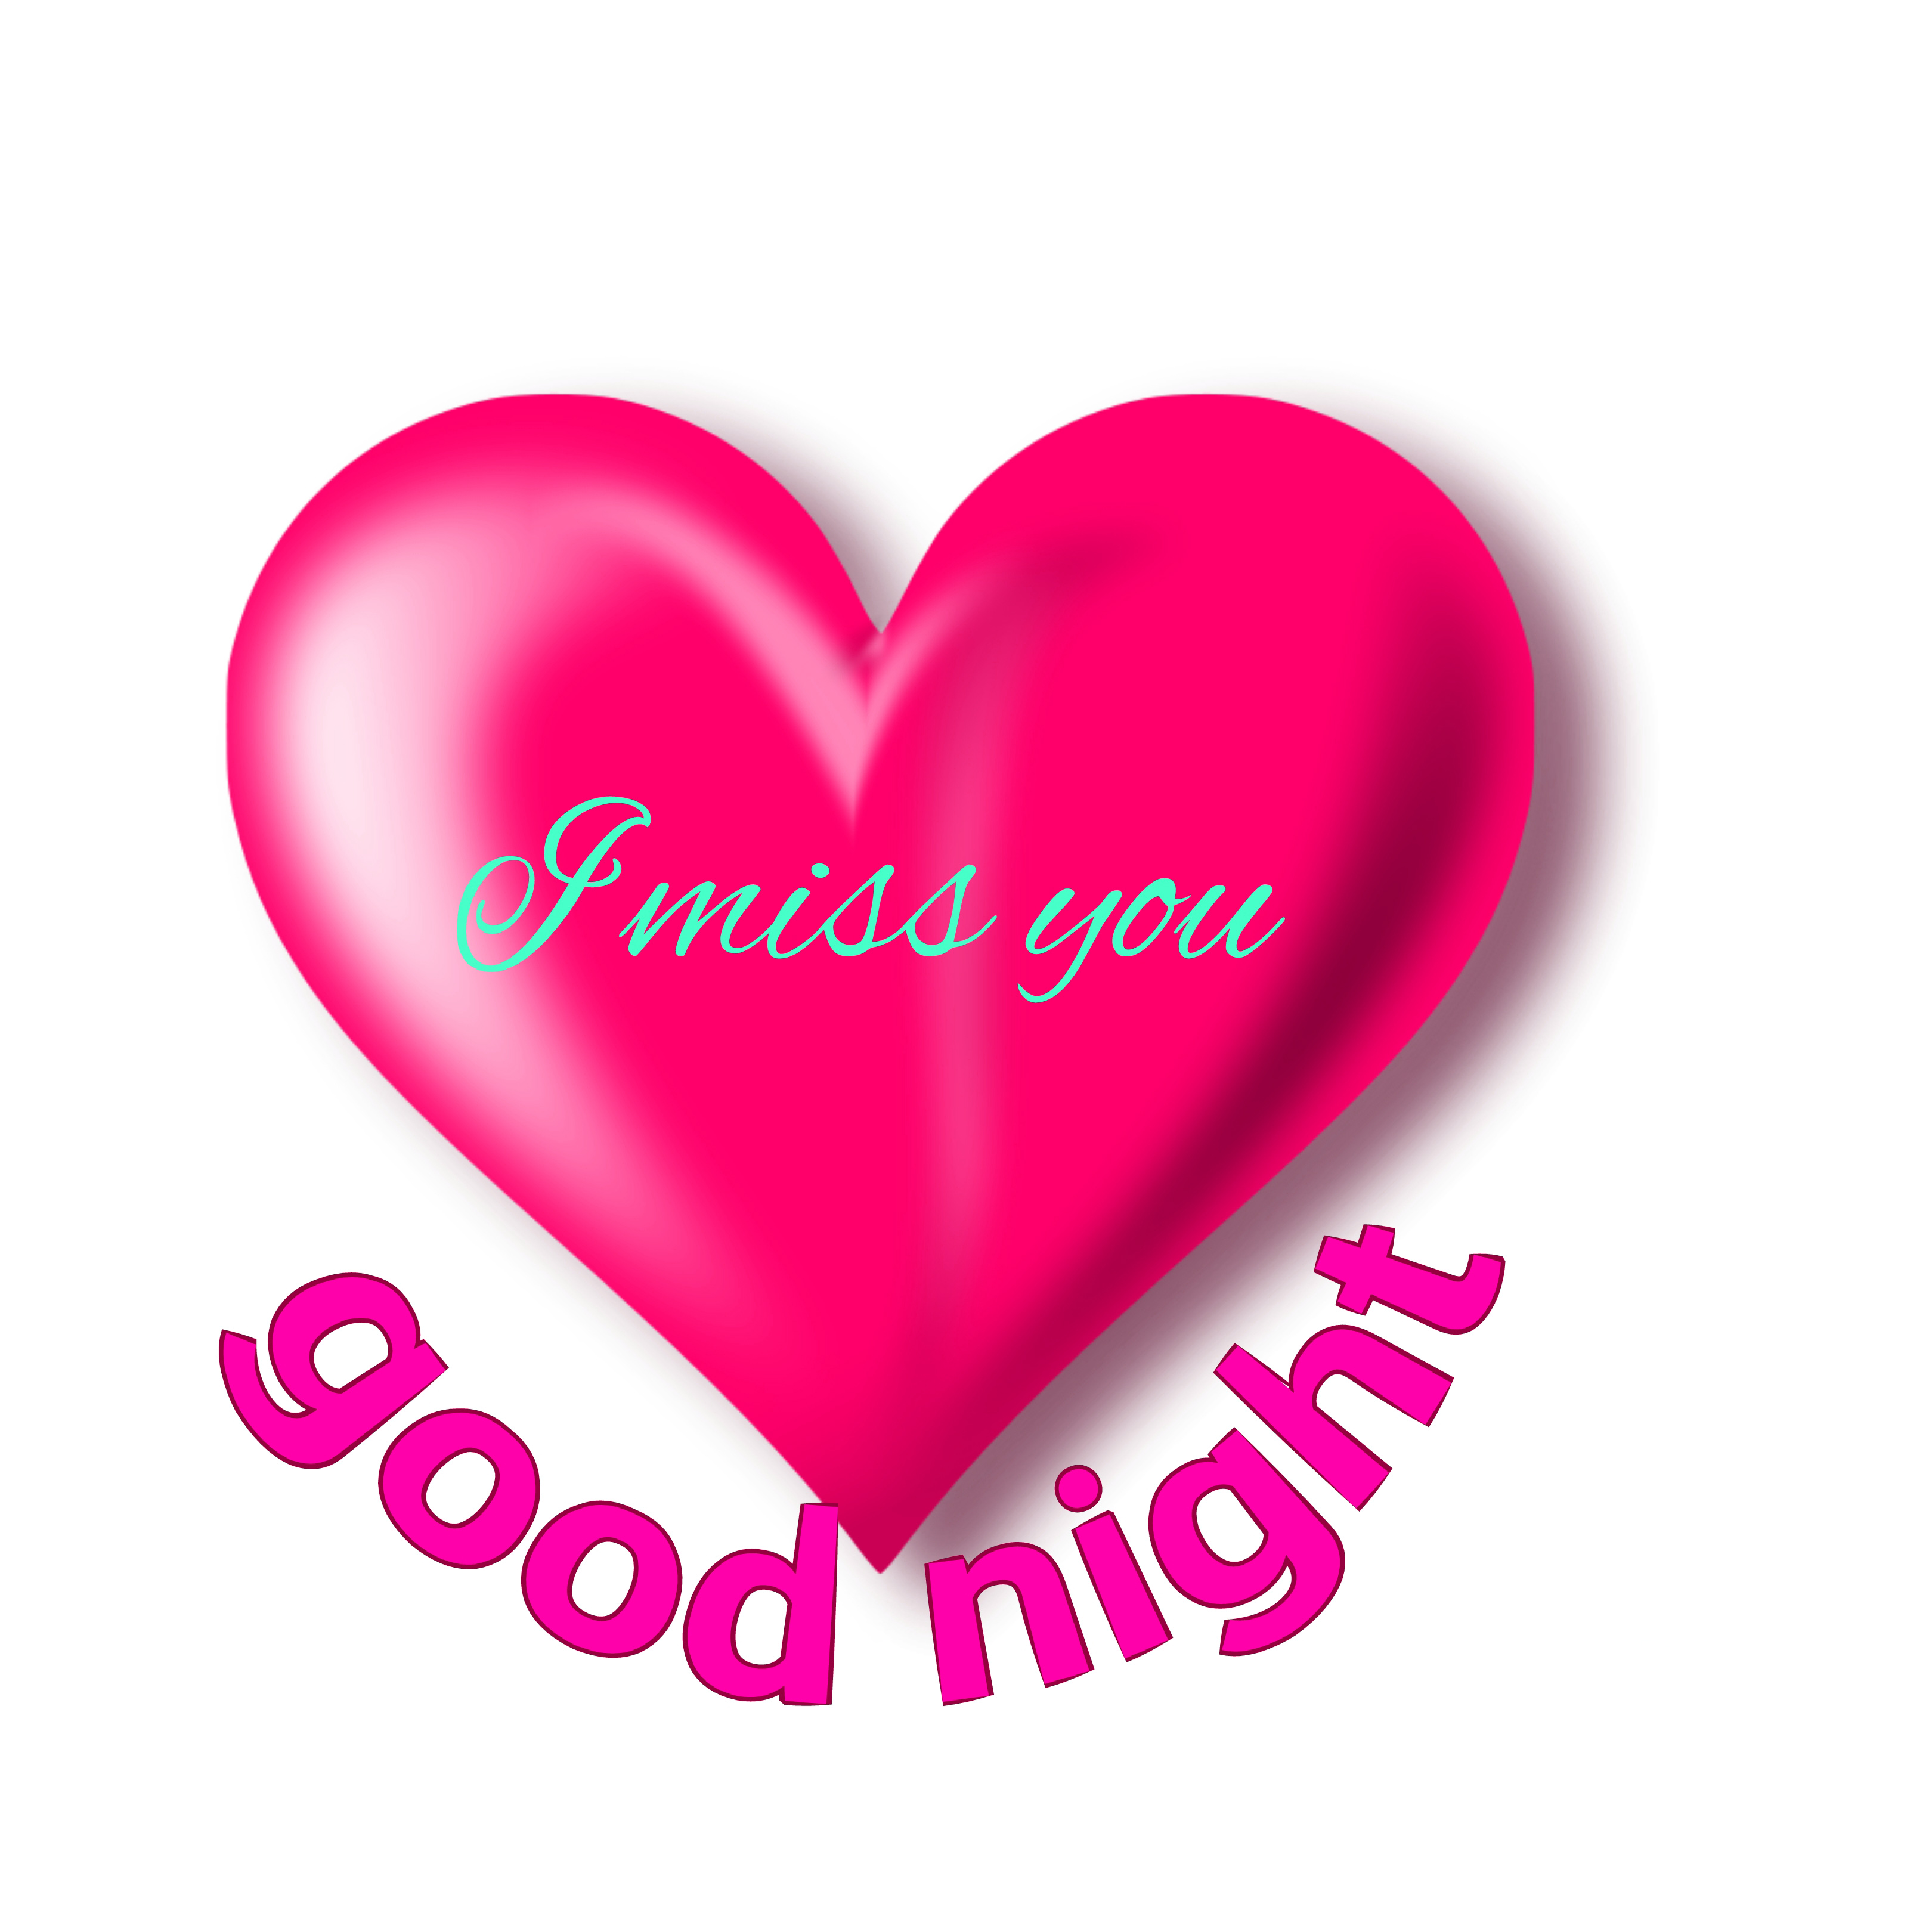 Good Night Images Wallpaper Pic Download & Share - Love Good Night , HD Wallpaper & Backgrounds